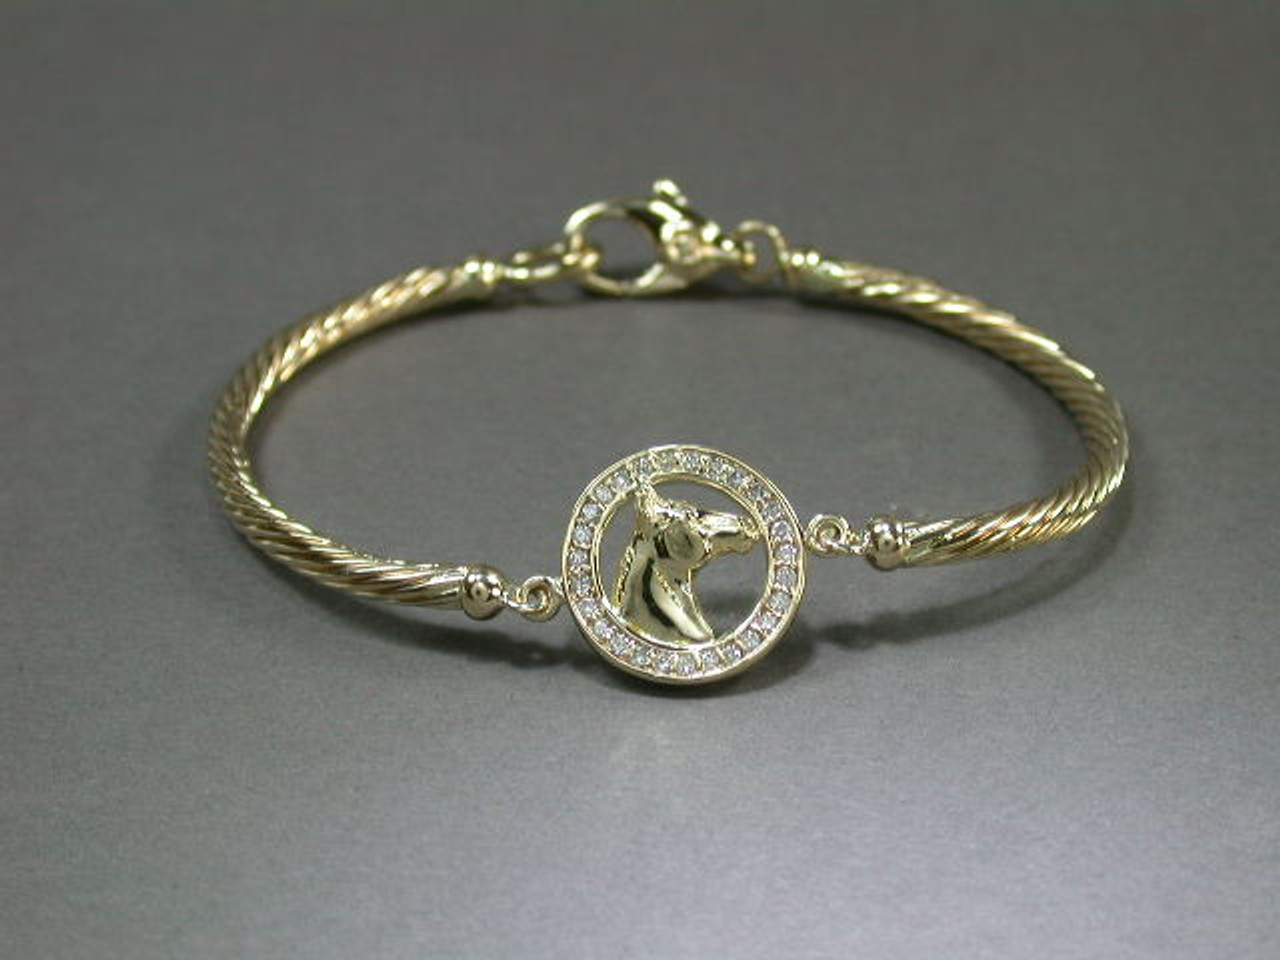 Bracelet Twisted Cable Diamonds With Quarter Horse